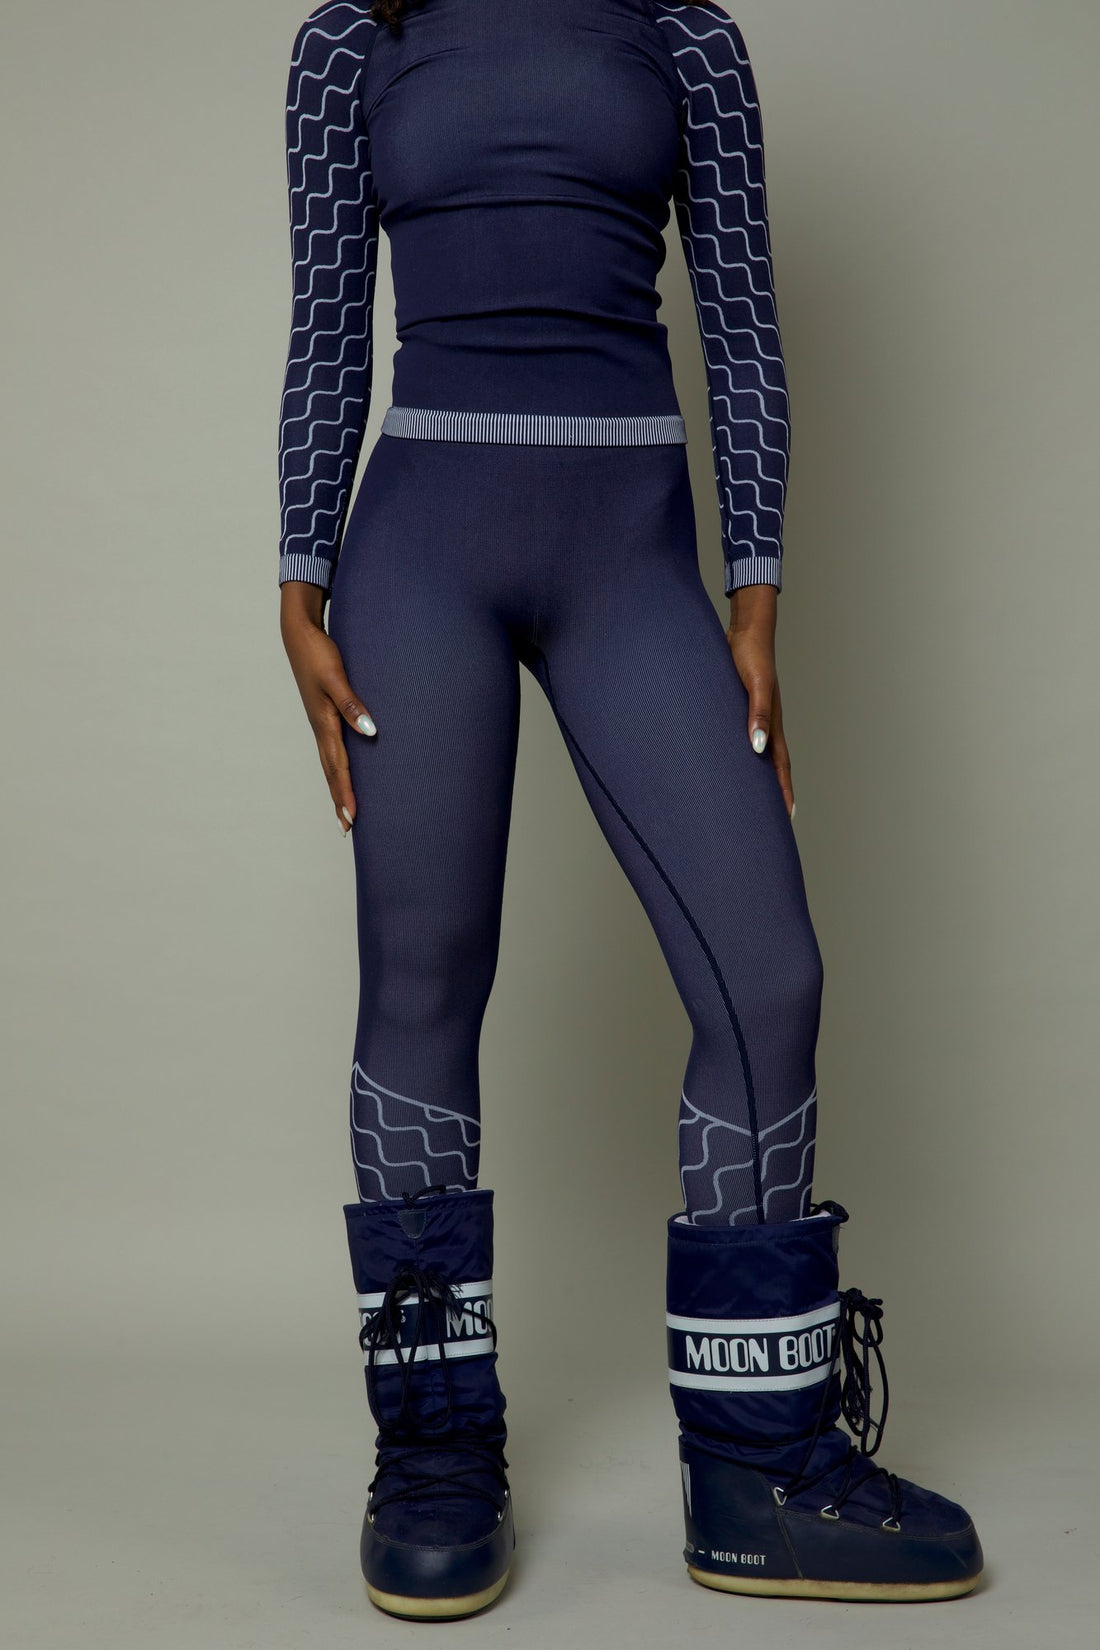 From Ski Slopes to Couch Snuggles: Thermal Underwear for Every Winter –  Thermajohn